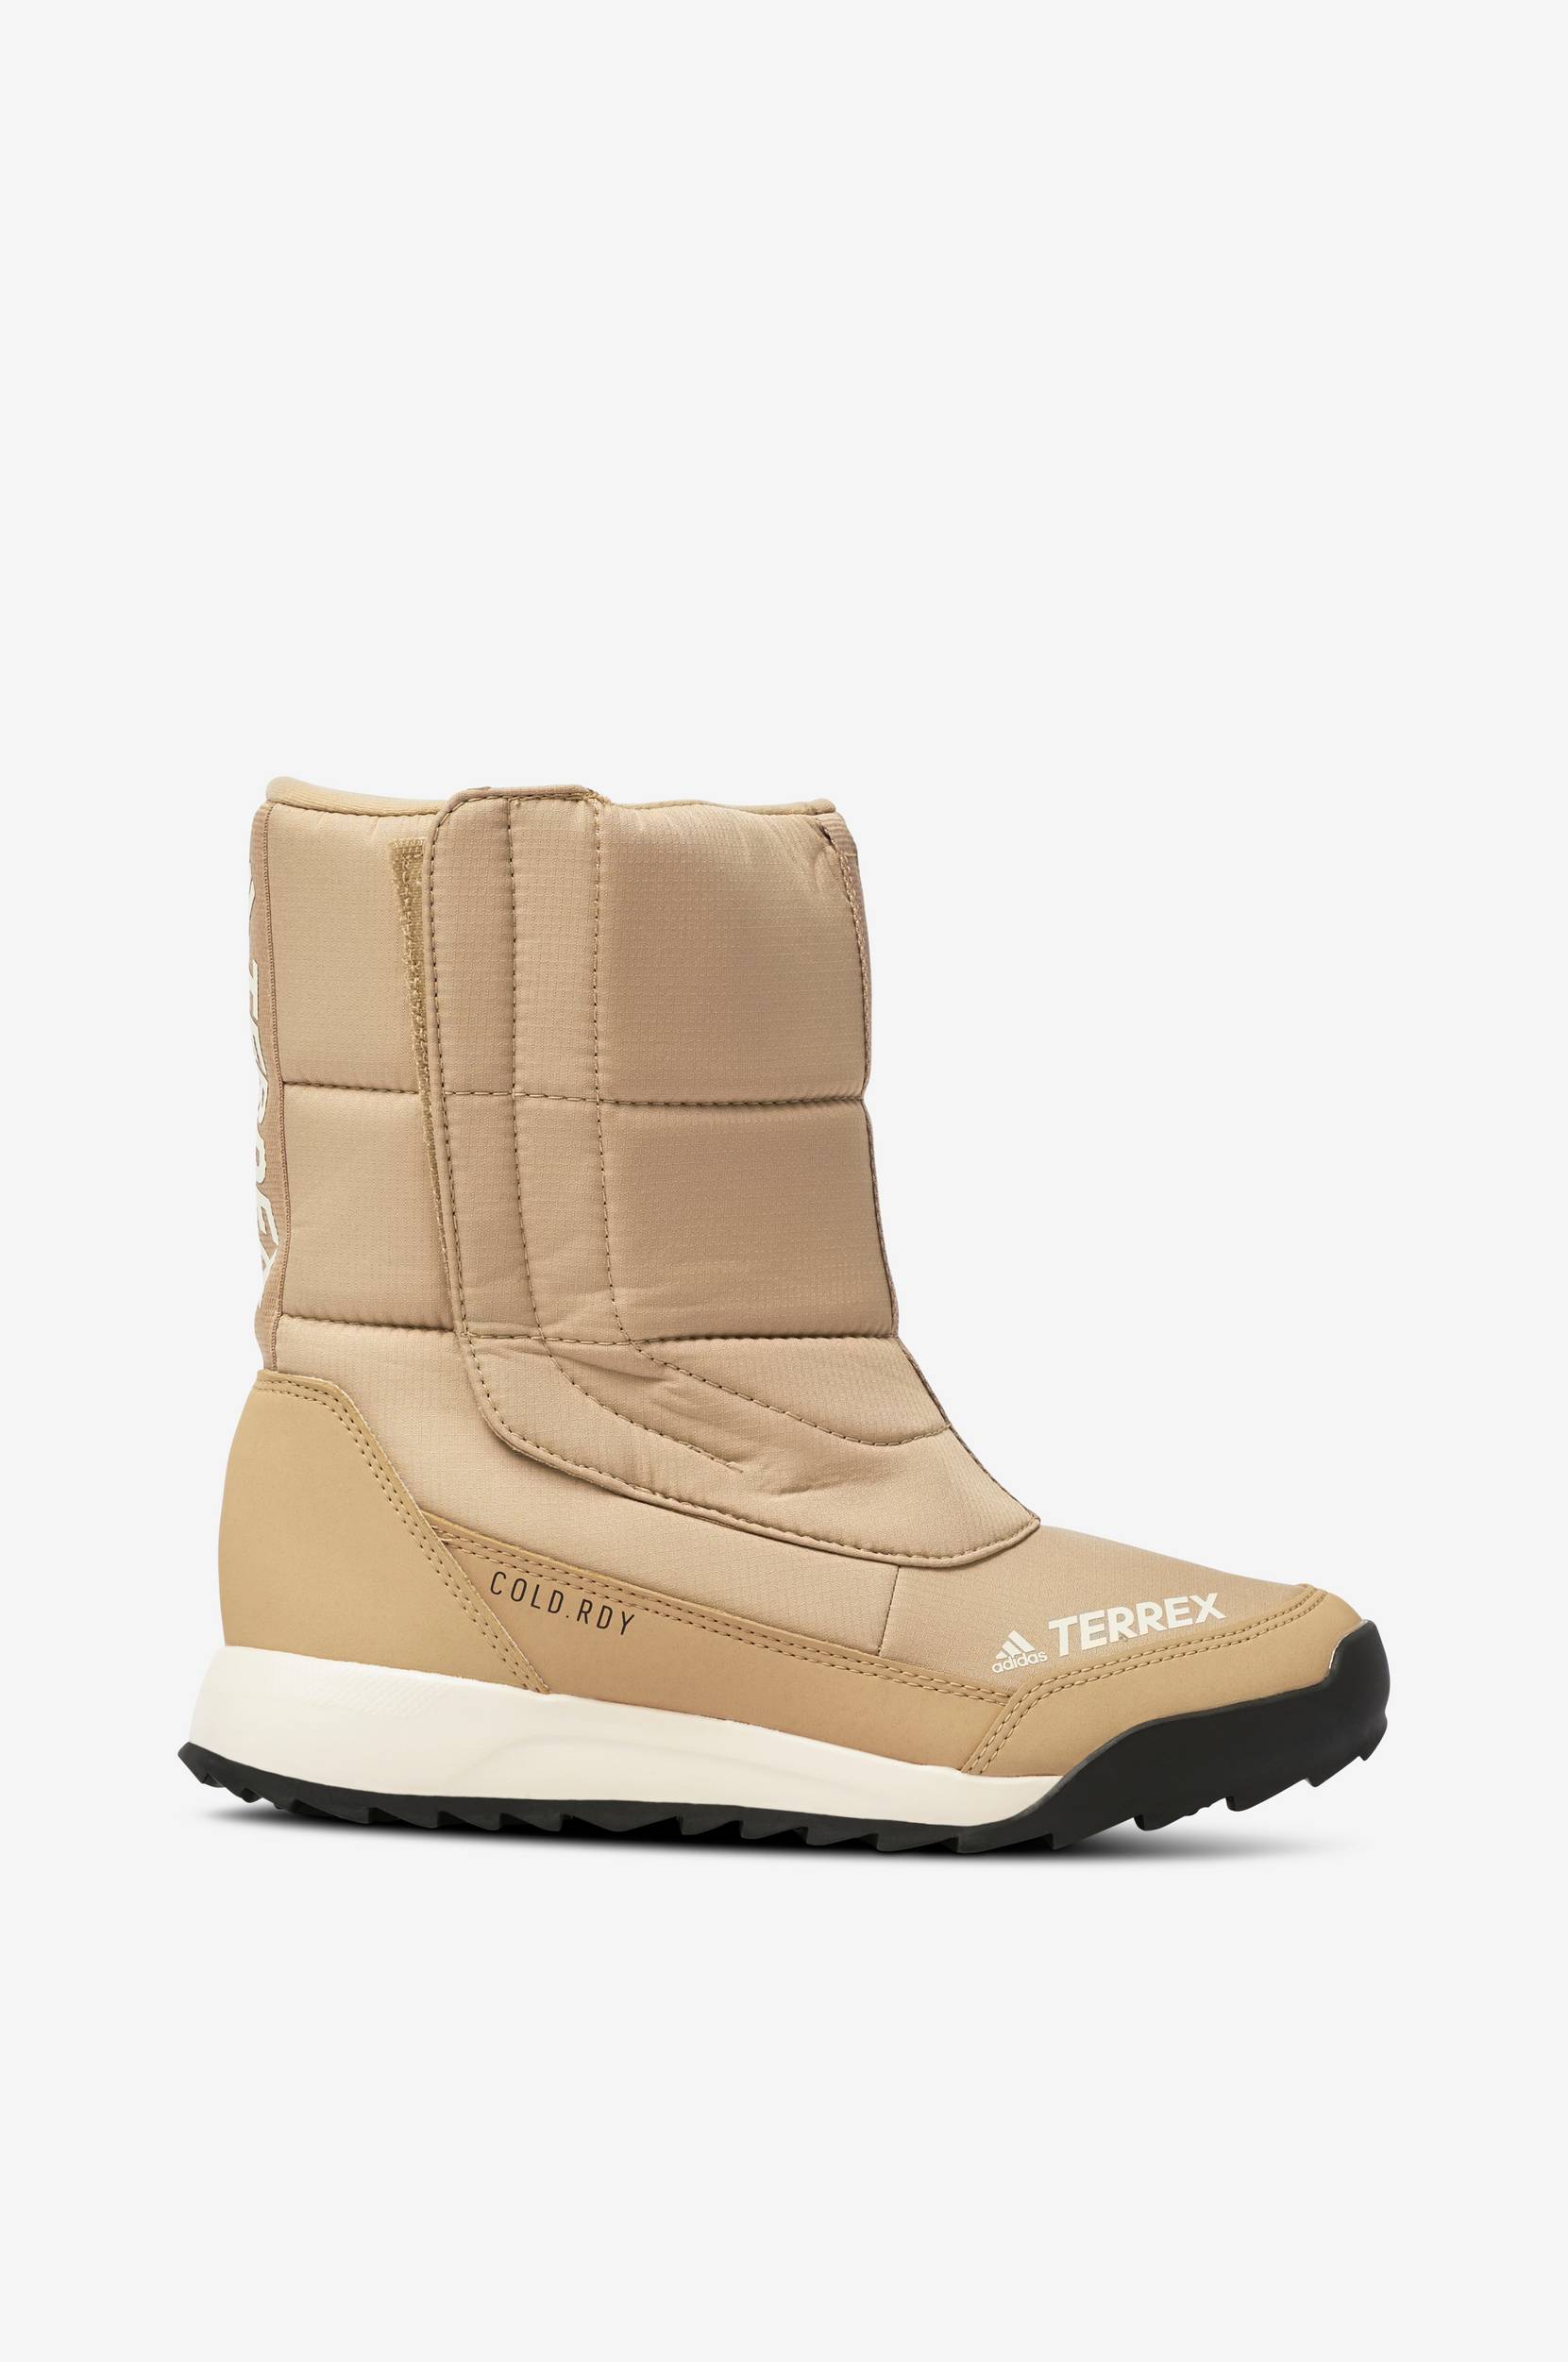 adidas Sport Performance - Boots Terrex Choleah Cold.rdy Boots - Beige - 41